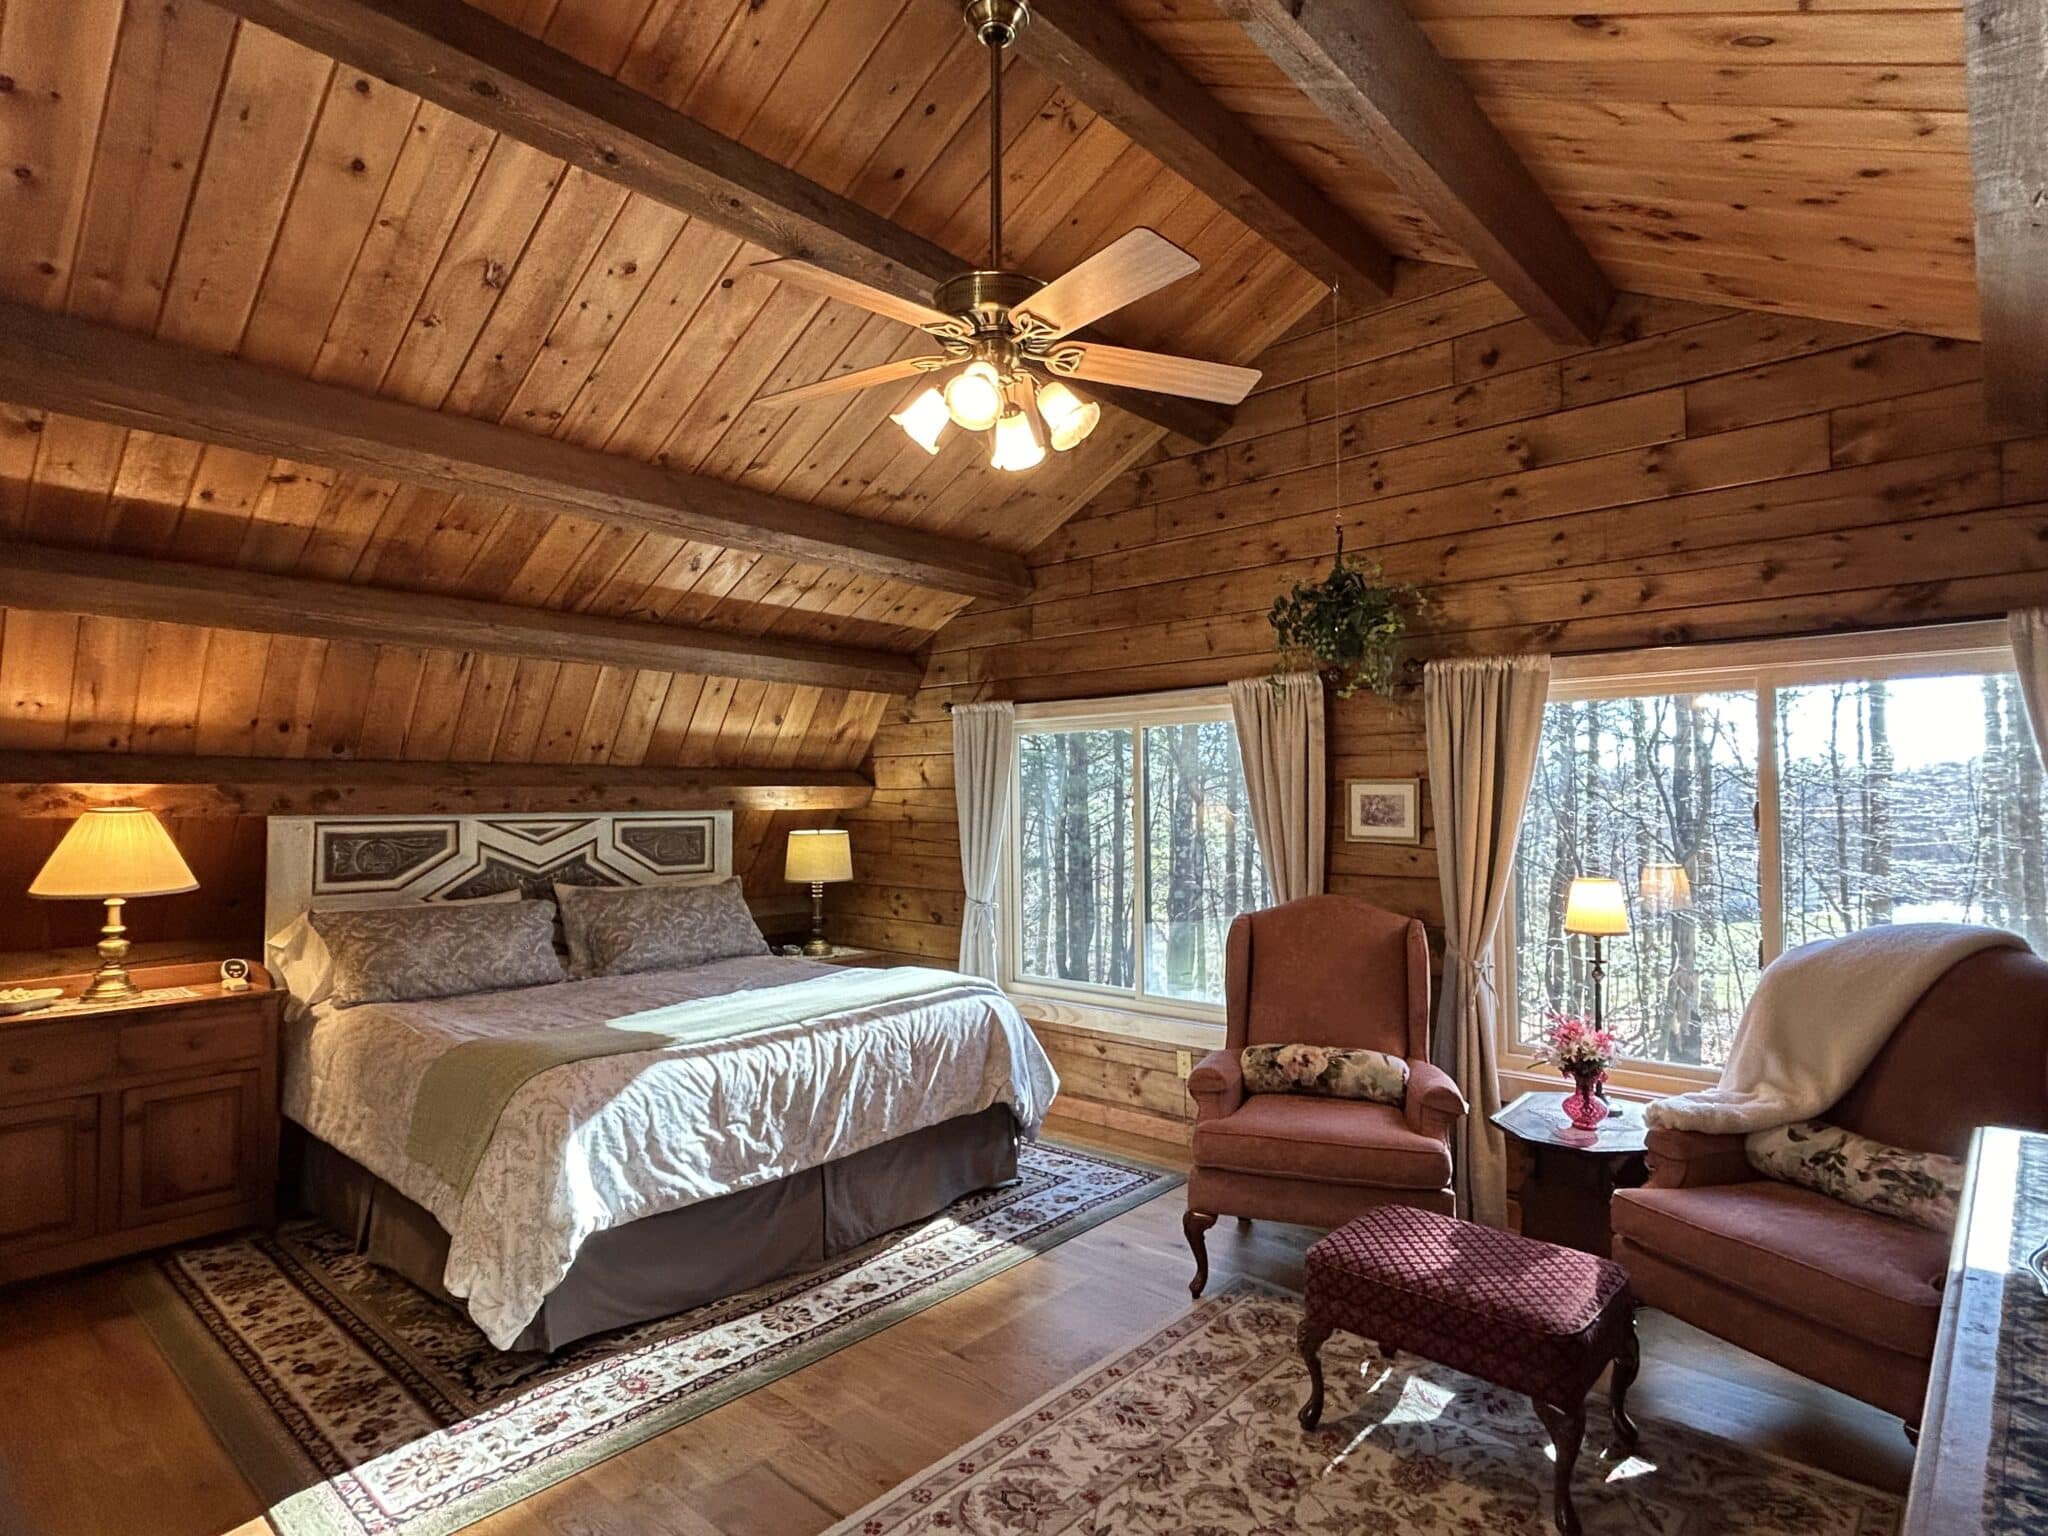 The Ramblewood Room has a king size bed, repurposed headboard, off-white spread, and a sitting area with 2 wingback chairs.  The large windows with beige drapers look out over the front forest.